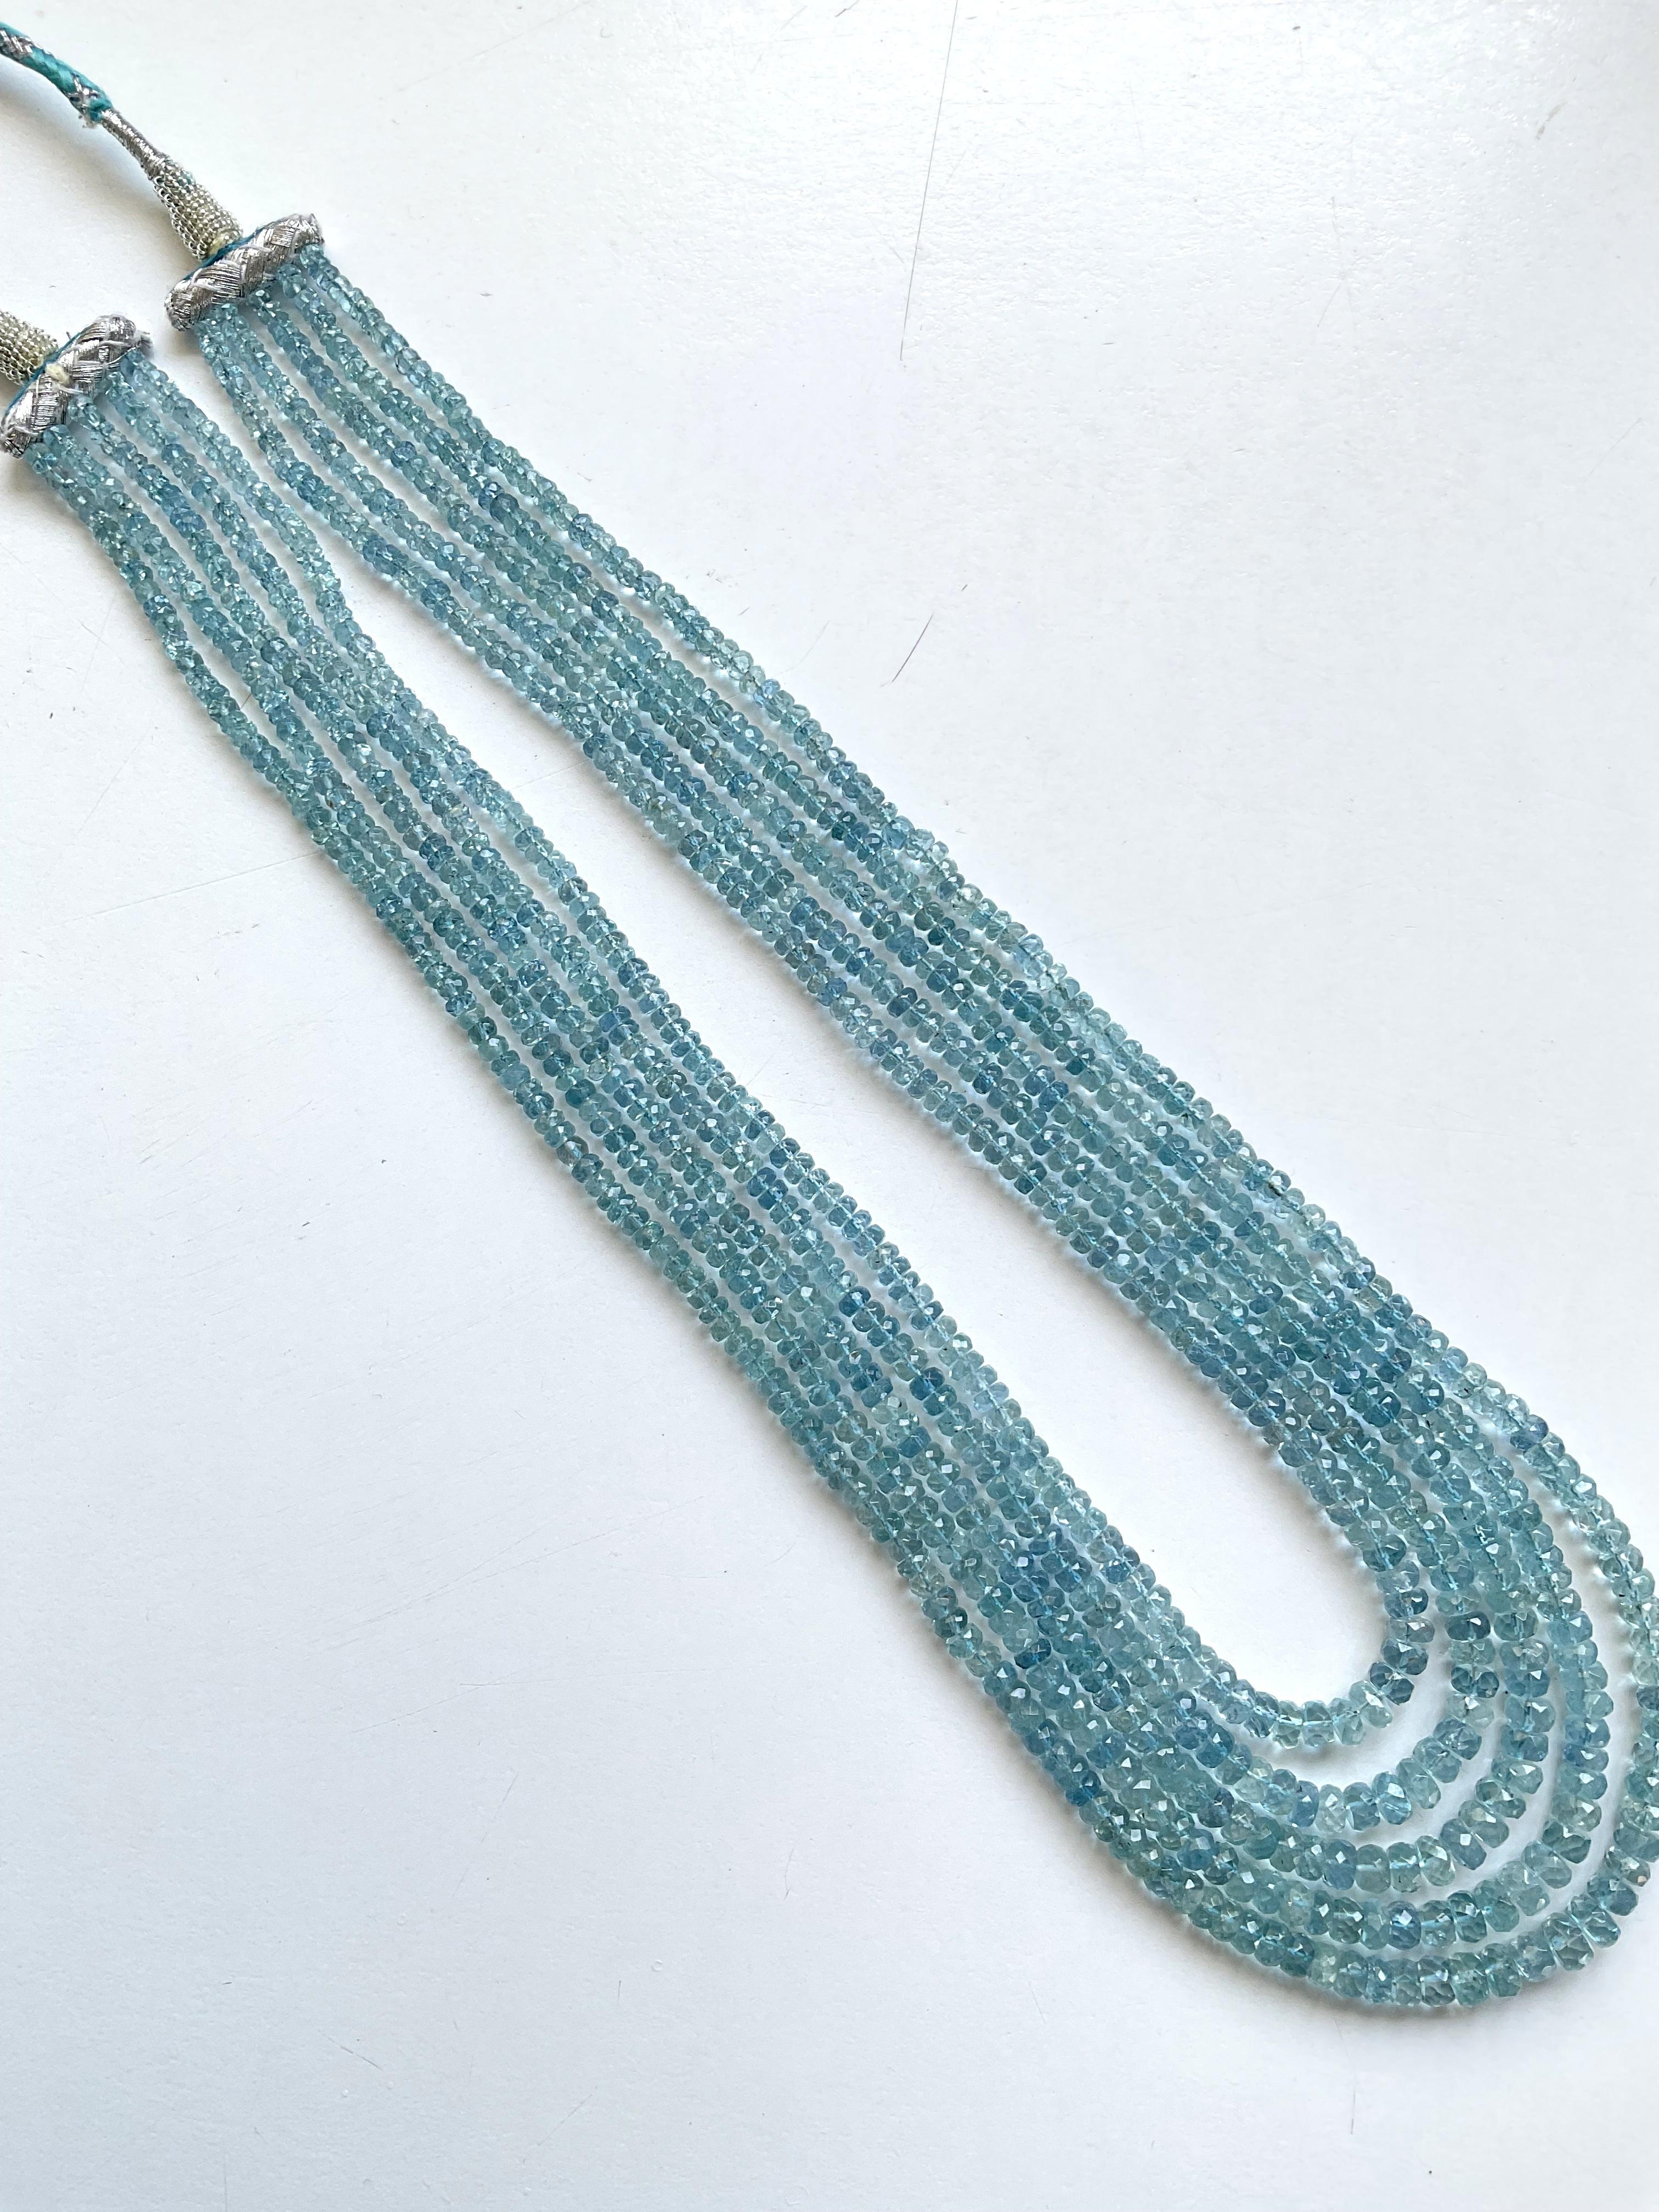 349.75 carats Aquamarine Beaded Necklace 5 Strand Faceted Beads good Quality Gem

gemstone - Aquamarine 
weight - 349.75 carats
size - 3 To 6 mm
quantity - 5 Strand
Length : 21 Inch.